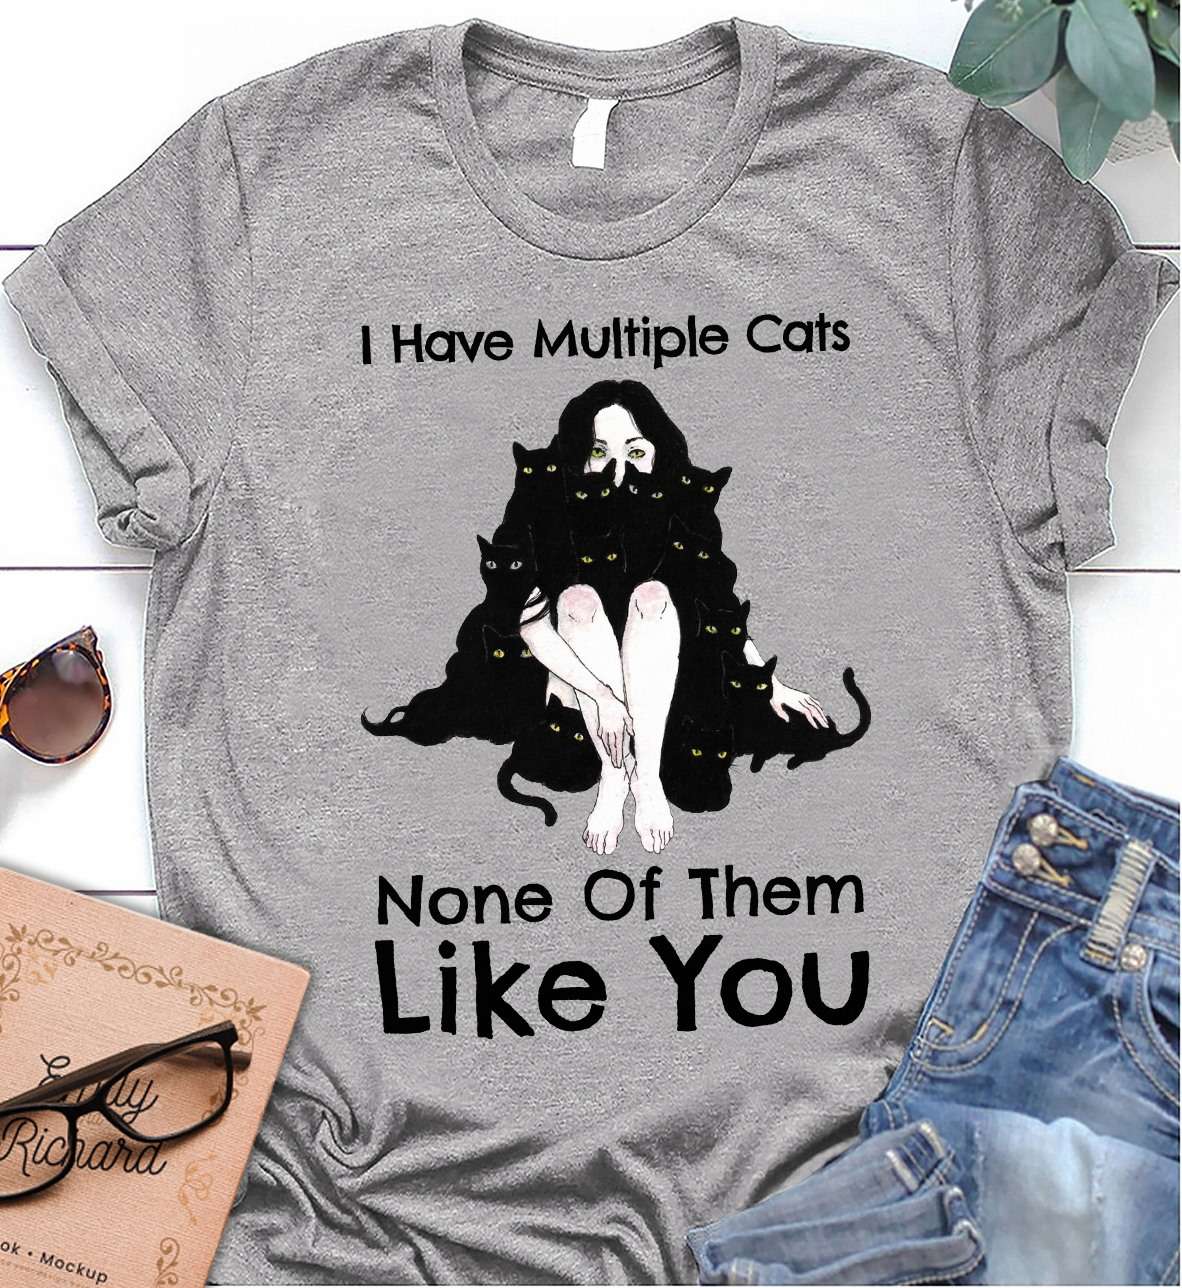 Black Cat Girl, Pack Of Black Cats - I have multiple cats none of them like you